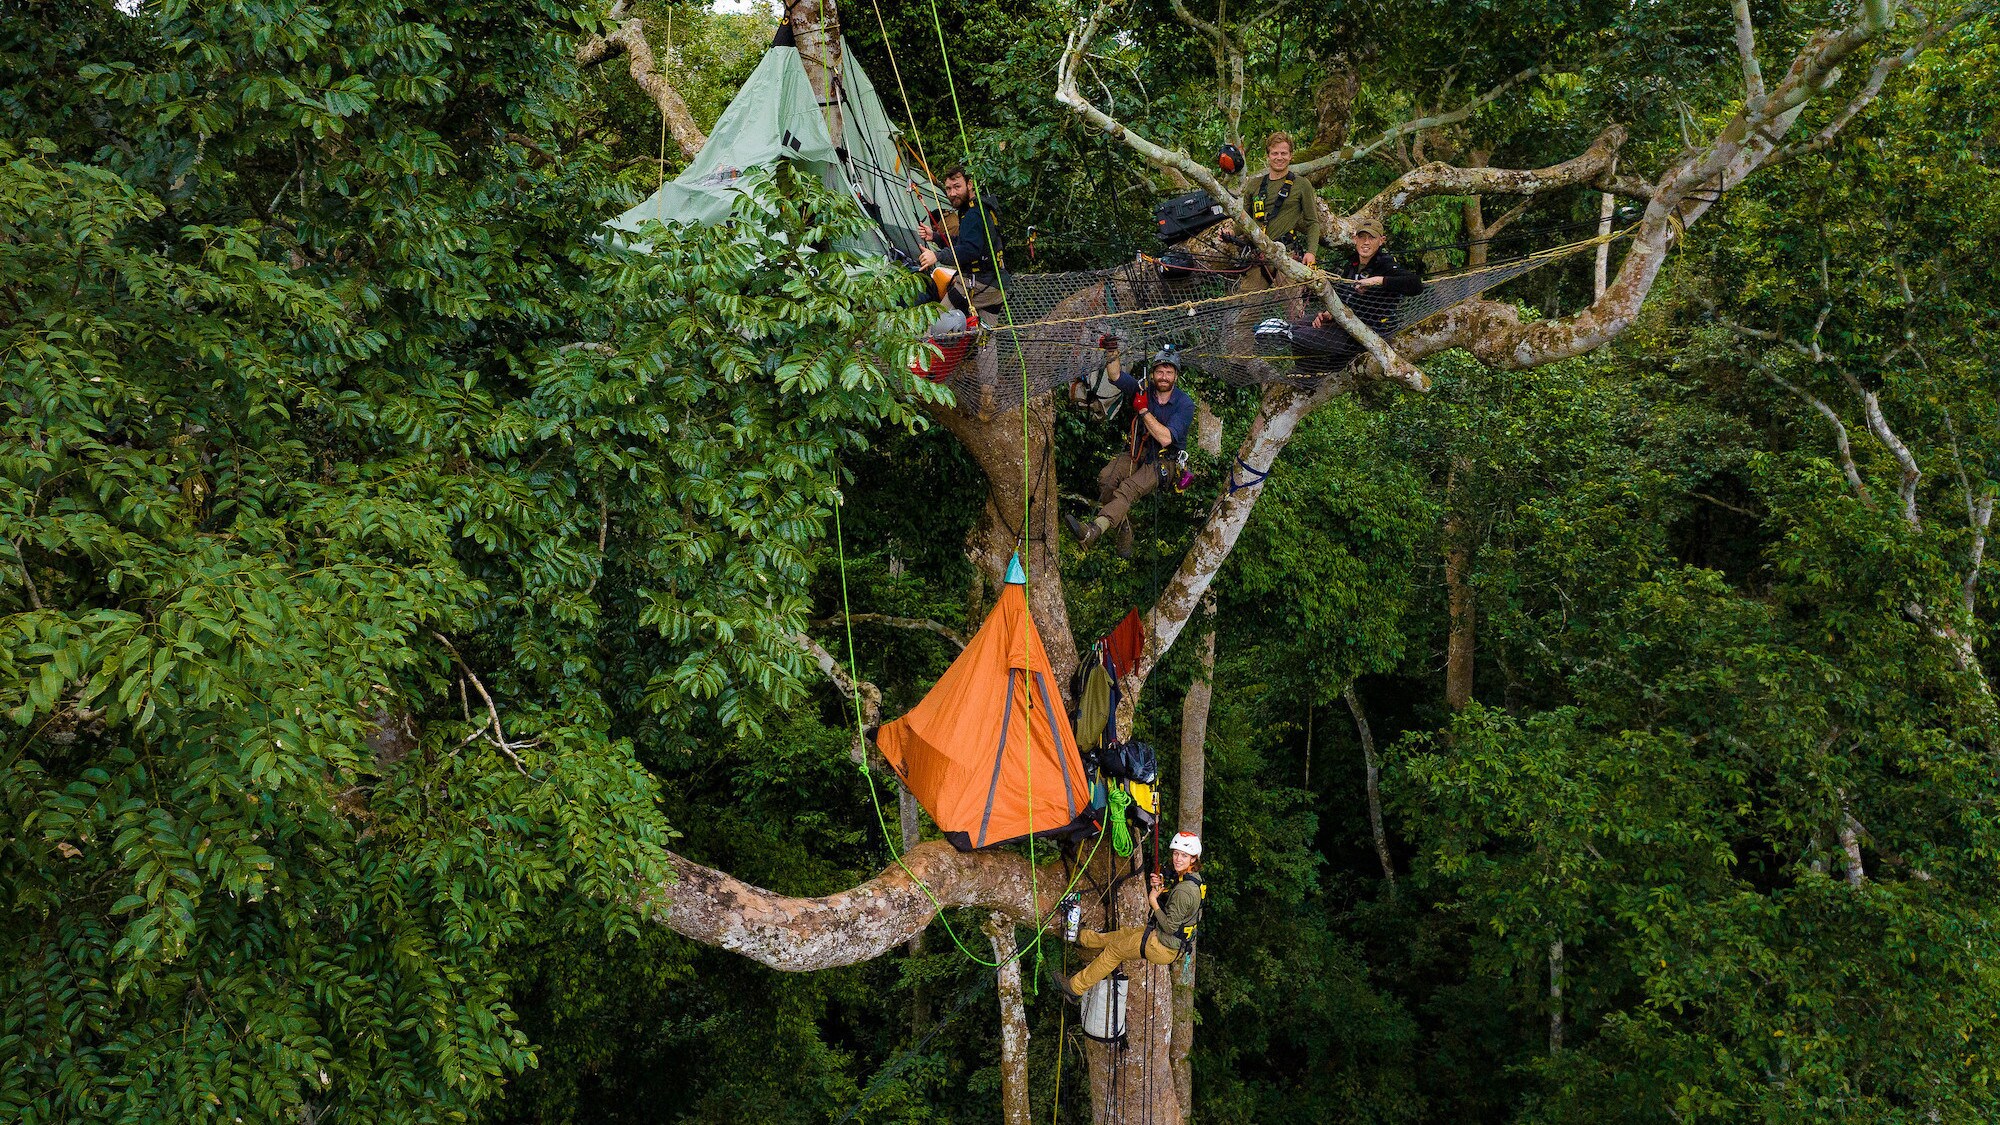 The crew in their tree canopy camp. (National Geographic for Disney+/Waldo Etherington)